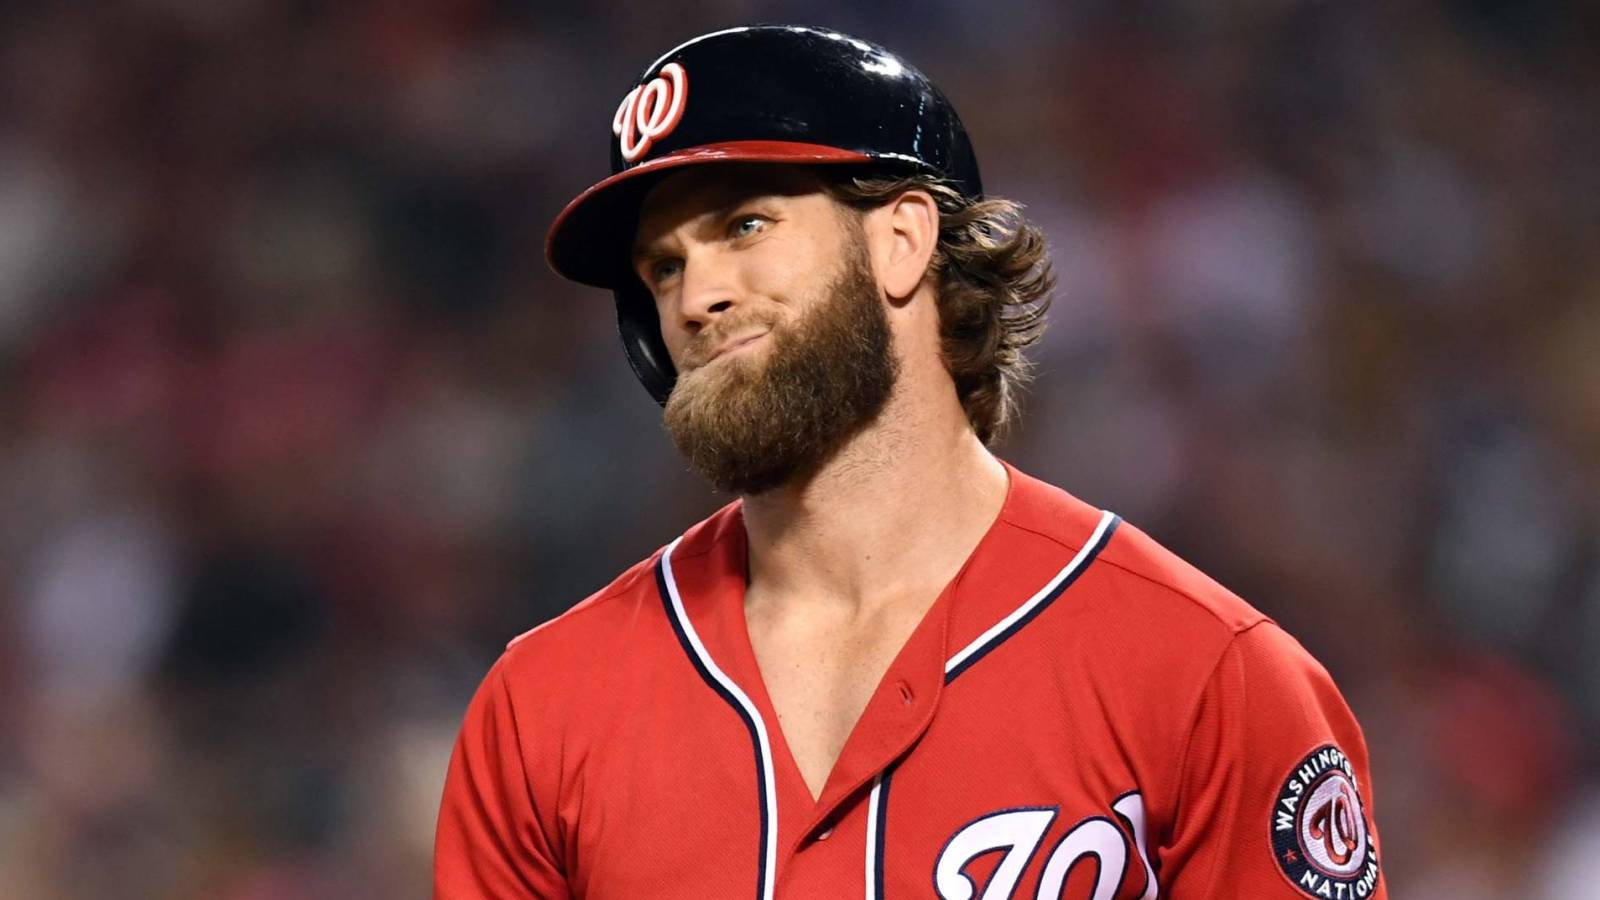 Bryce Harper loses his mind after striking out, gets ejected